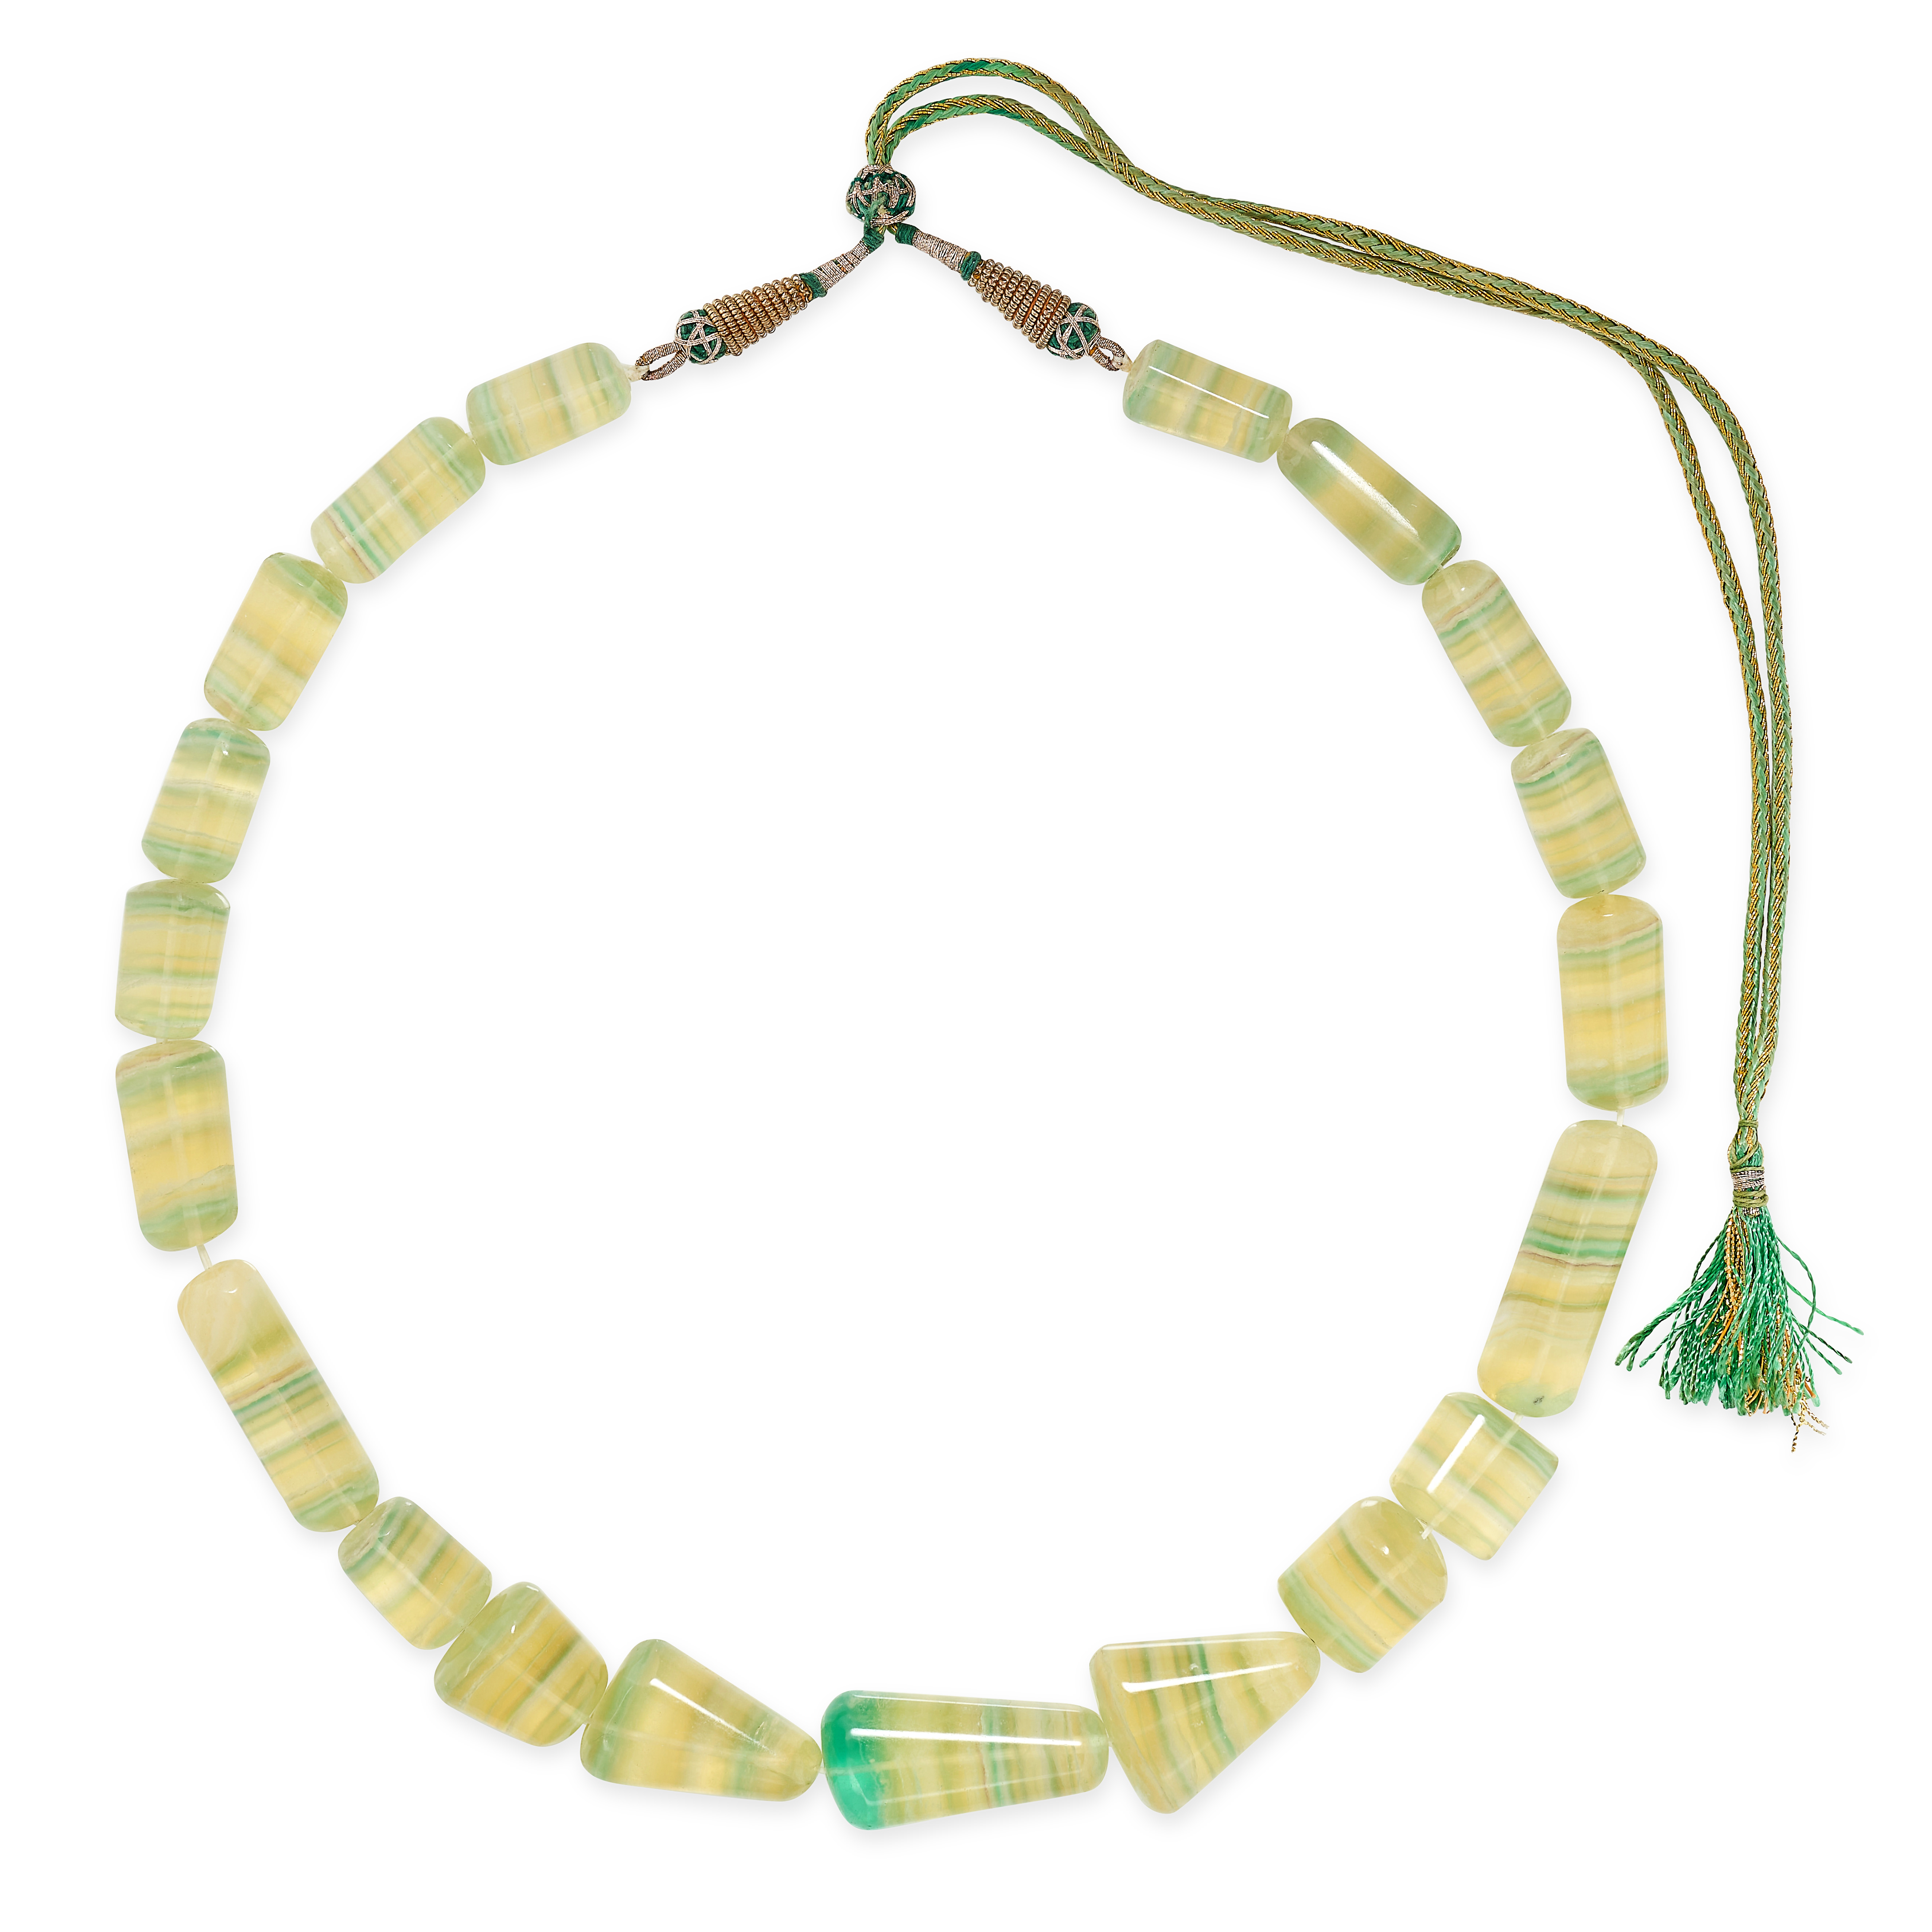 A FLUORITE BEAD NECKLACE comprising a row of graduated polished banded green - yellow fluorite beads